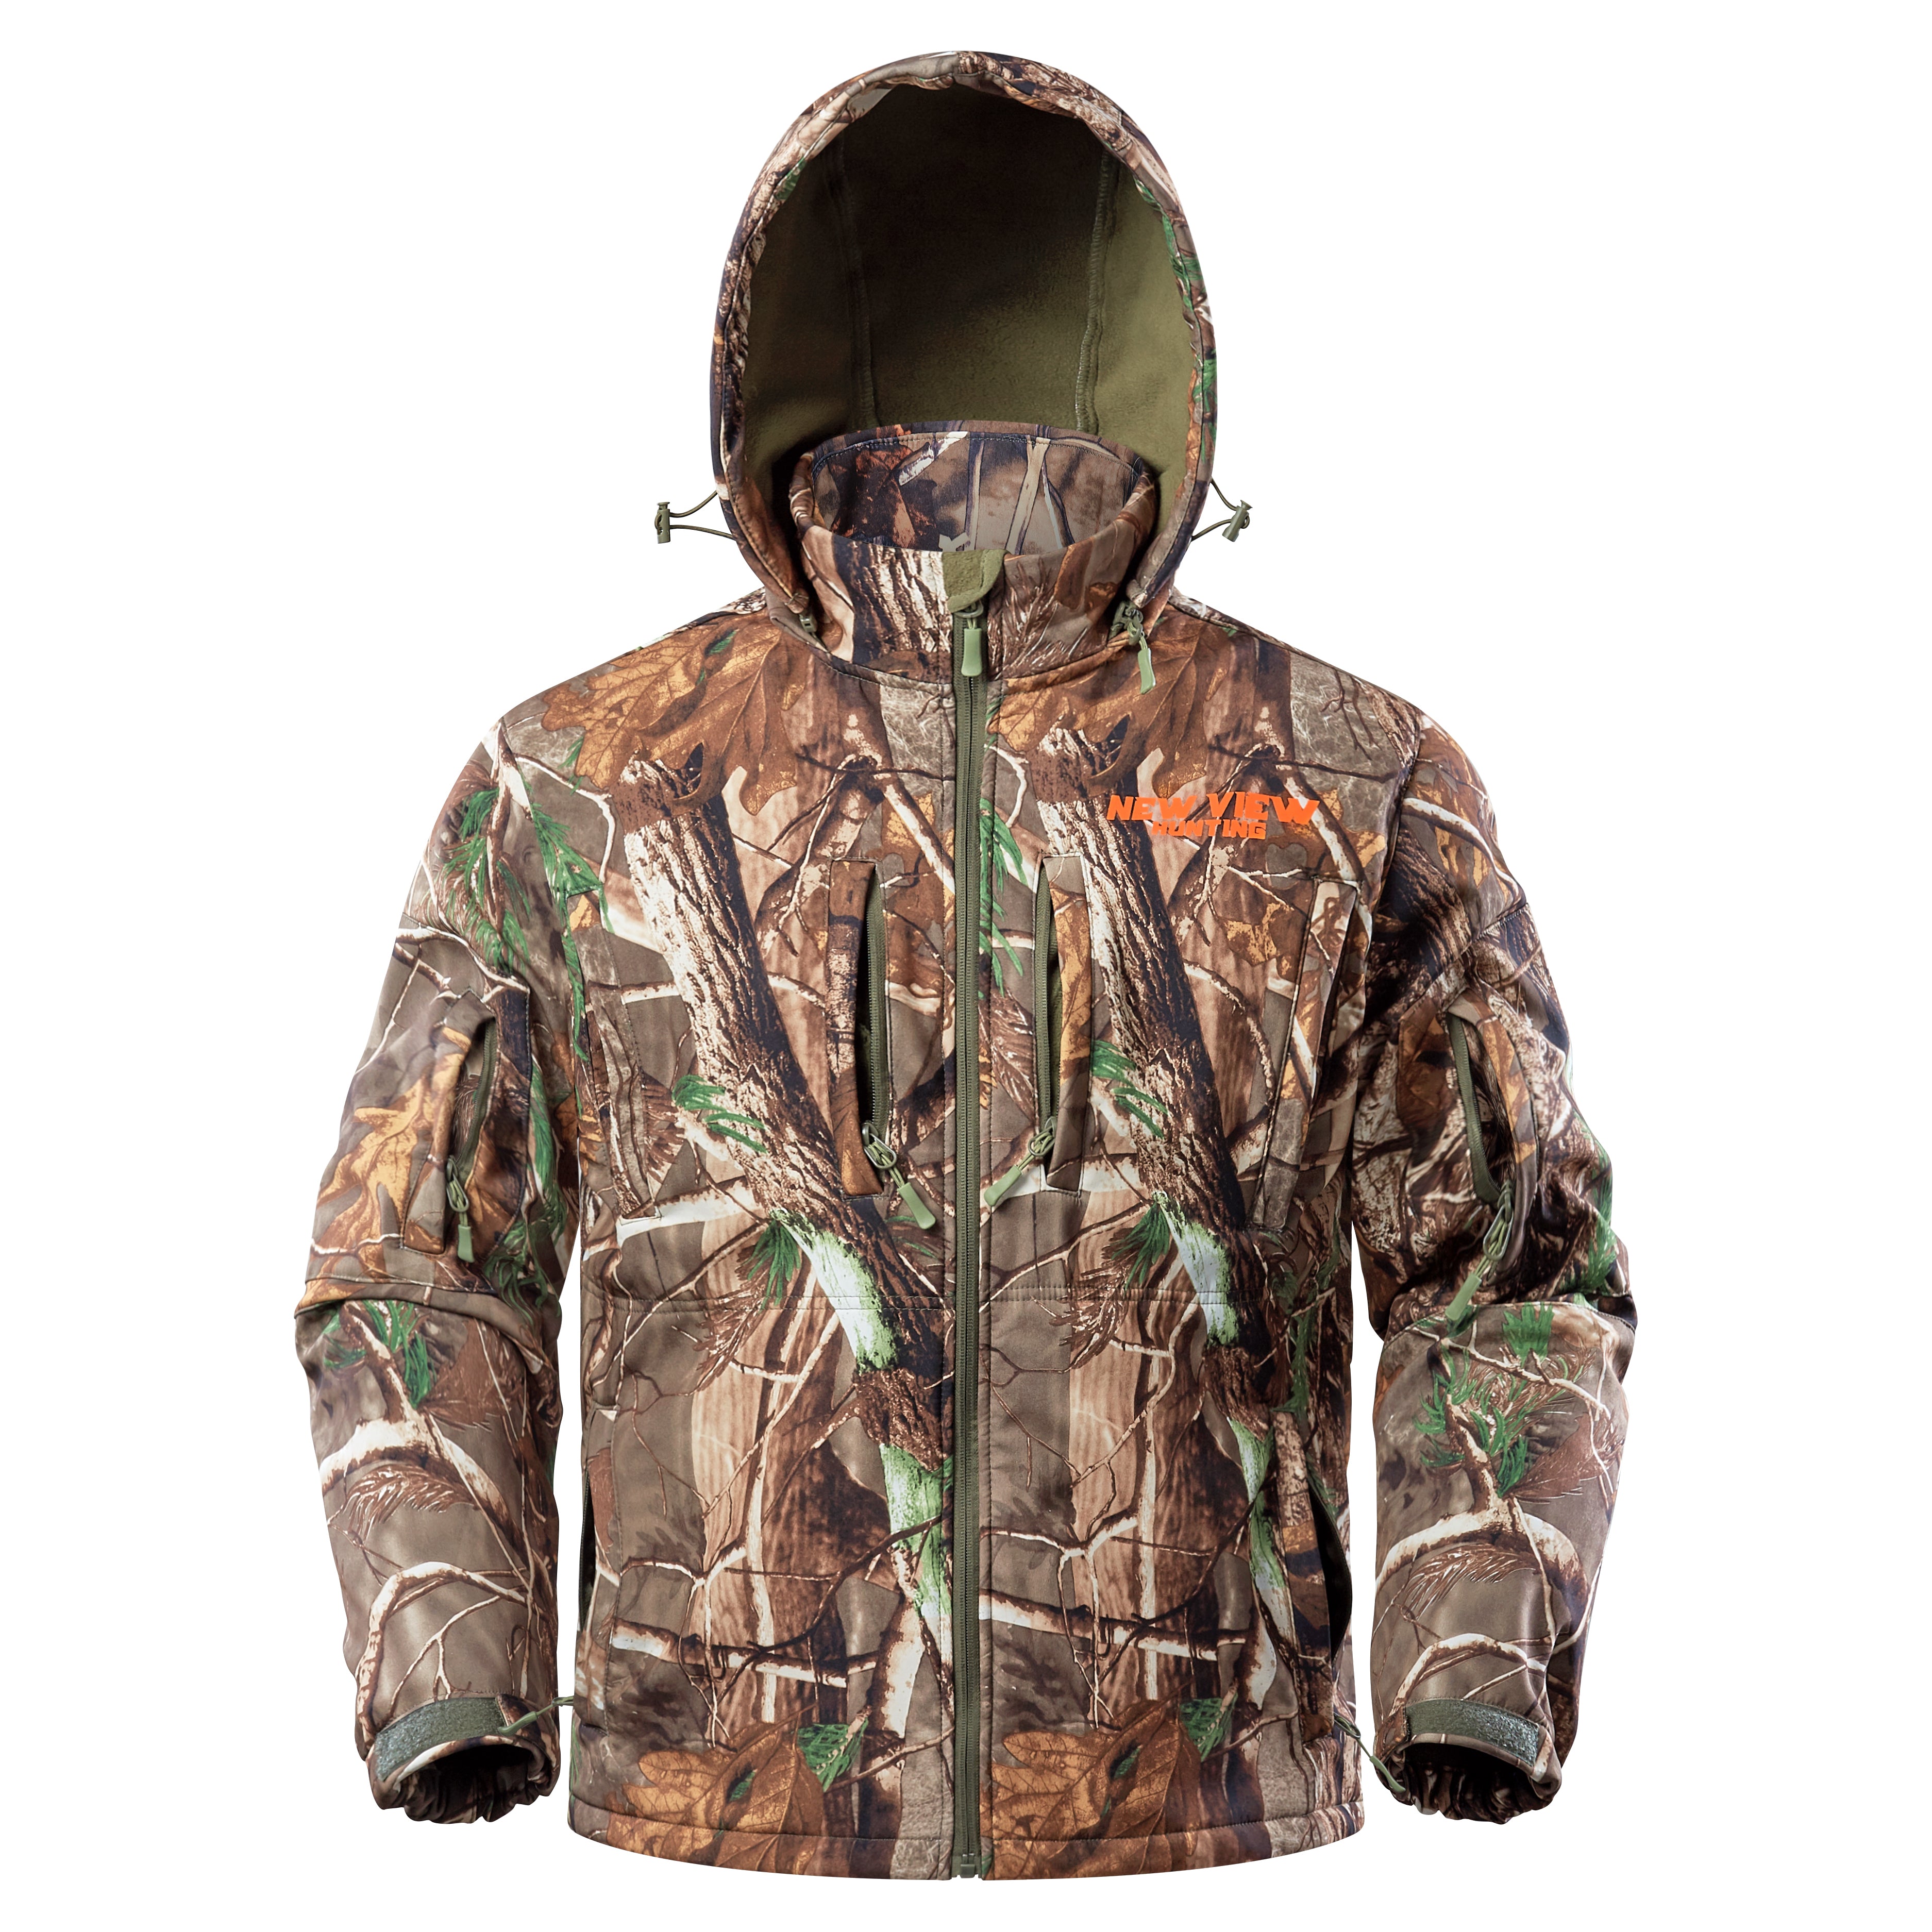 Quiet Camo Tree Hunting Jacket for Men with Fleece Lining